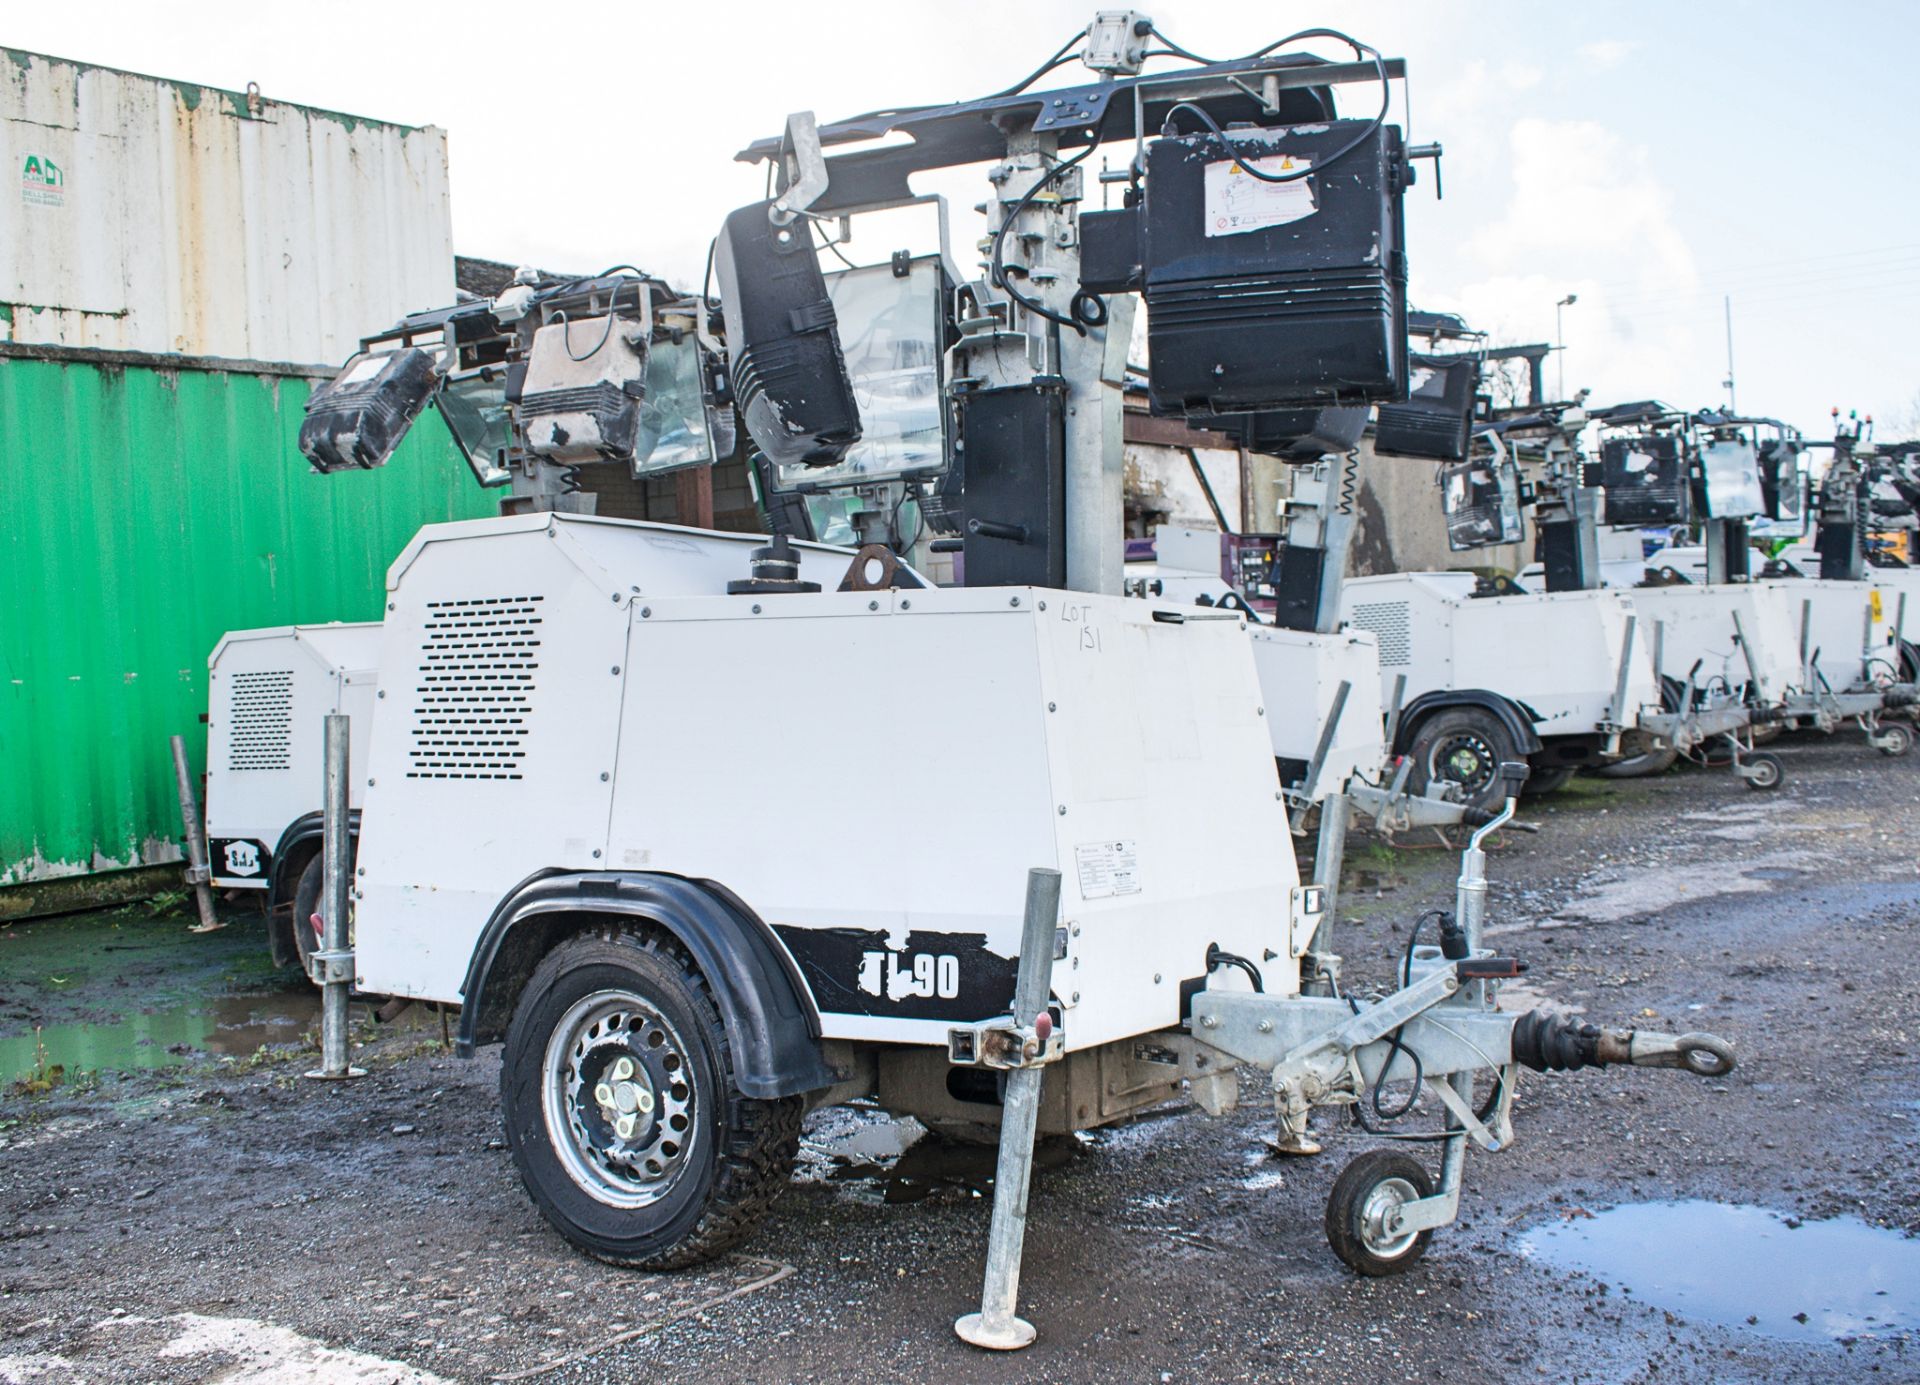 SMC TL-90 diesel driven mobile lighting tower  Year: 2012 S/N: 129657 Recorded hours: 5835 A593319 - Image 2 of 8